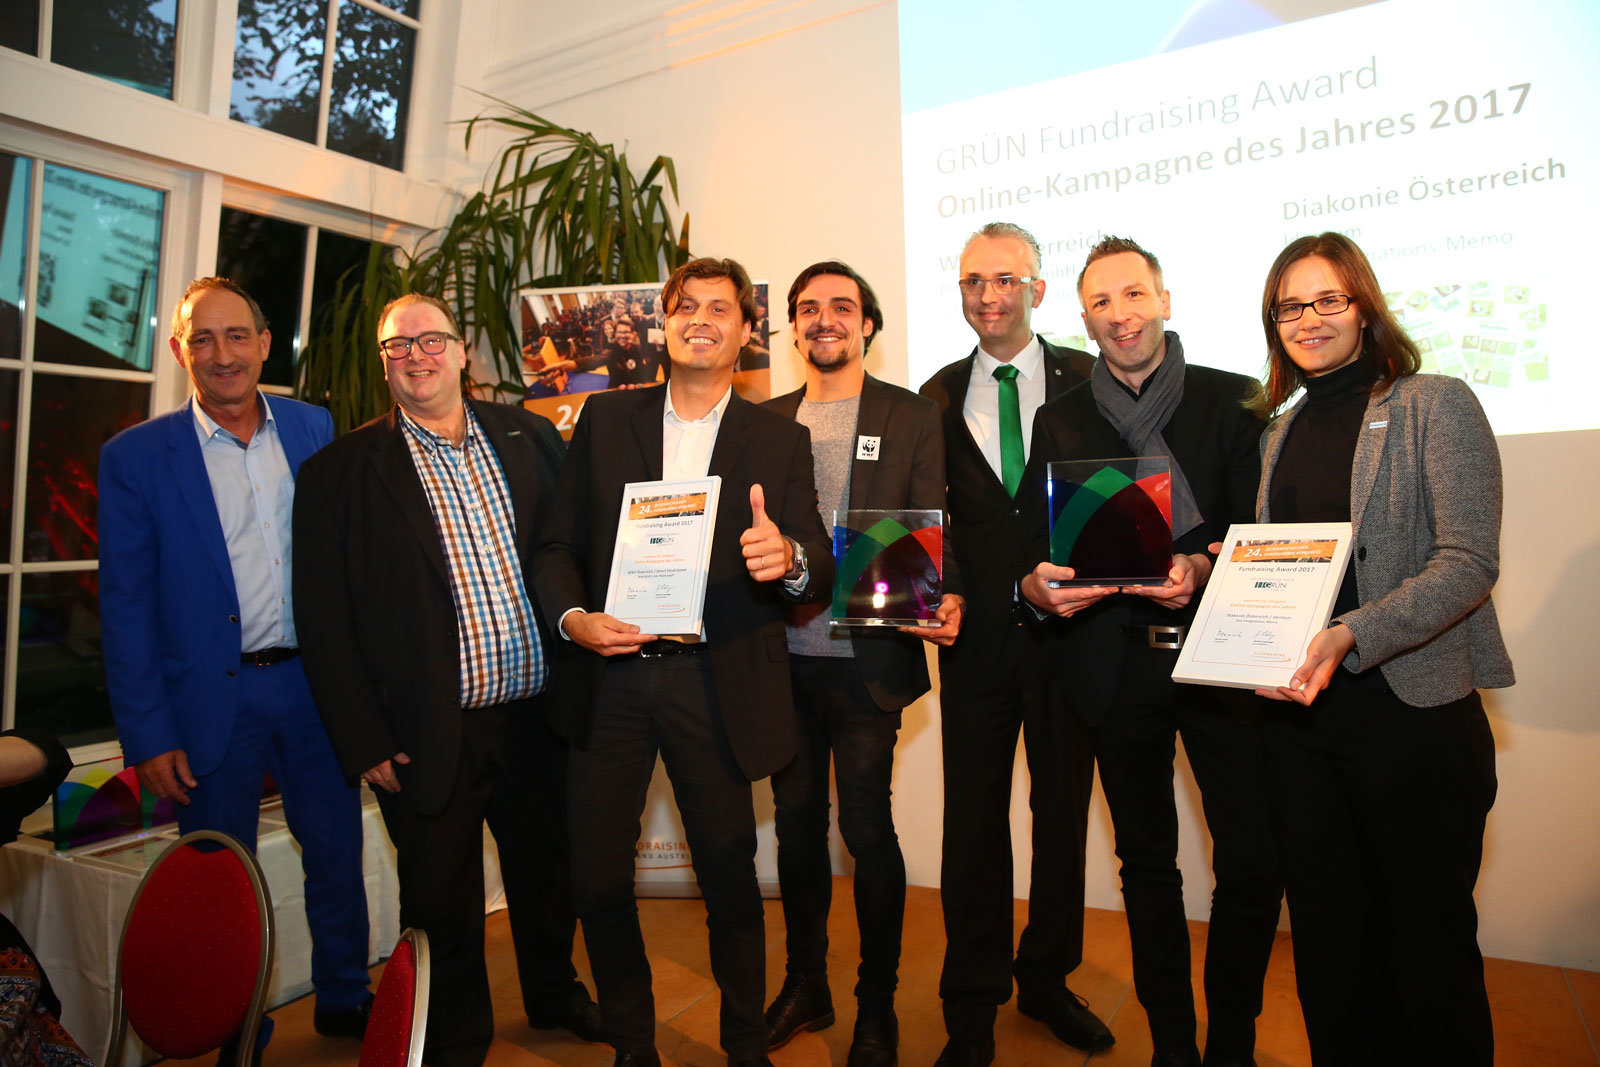 Ralph Backes (2nd from left) and Joachim Sina (3rd from right) handed over the GRÜN Fundraising Awards to the lucky winners.